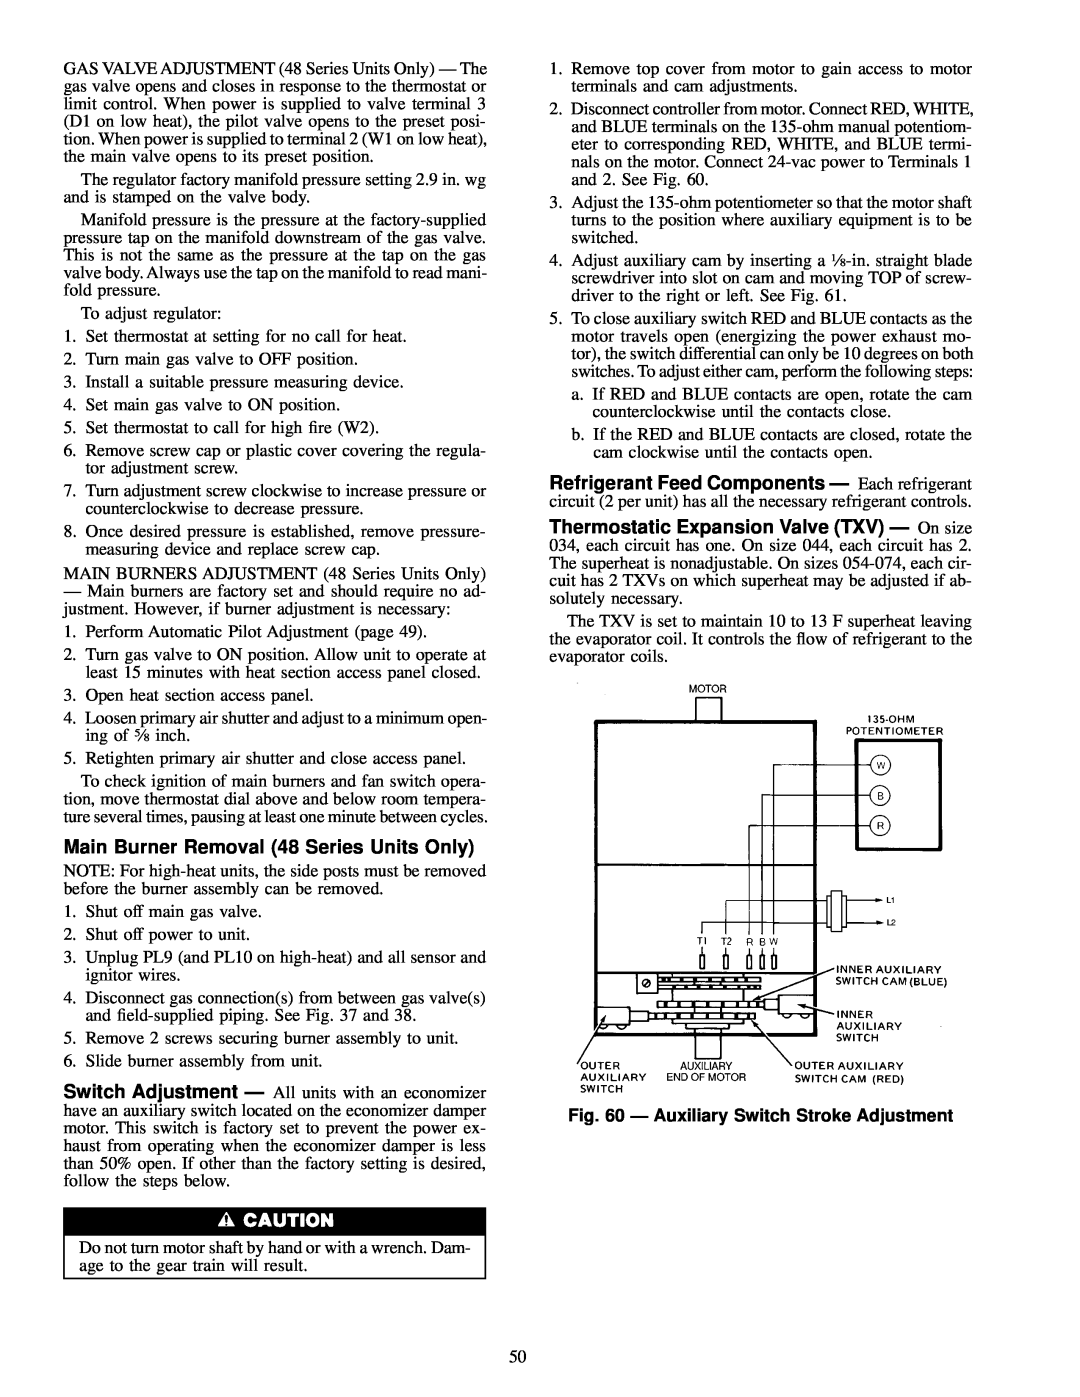 Carrier NP034-074 specifications Main Burner Removal 48 Series Units Only, Ð Auxiliary Switch Stroke Adjustment 